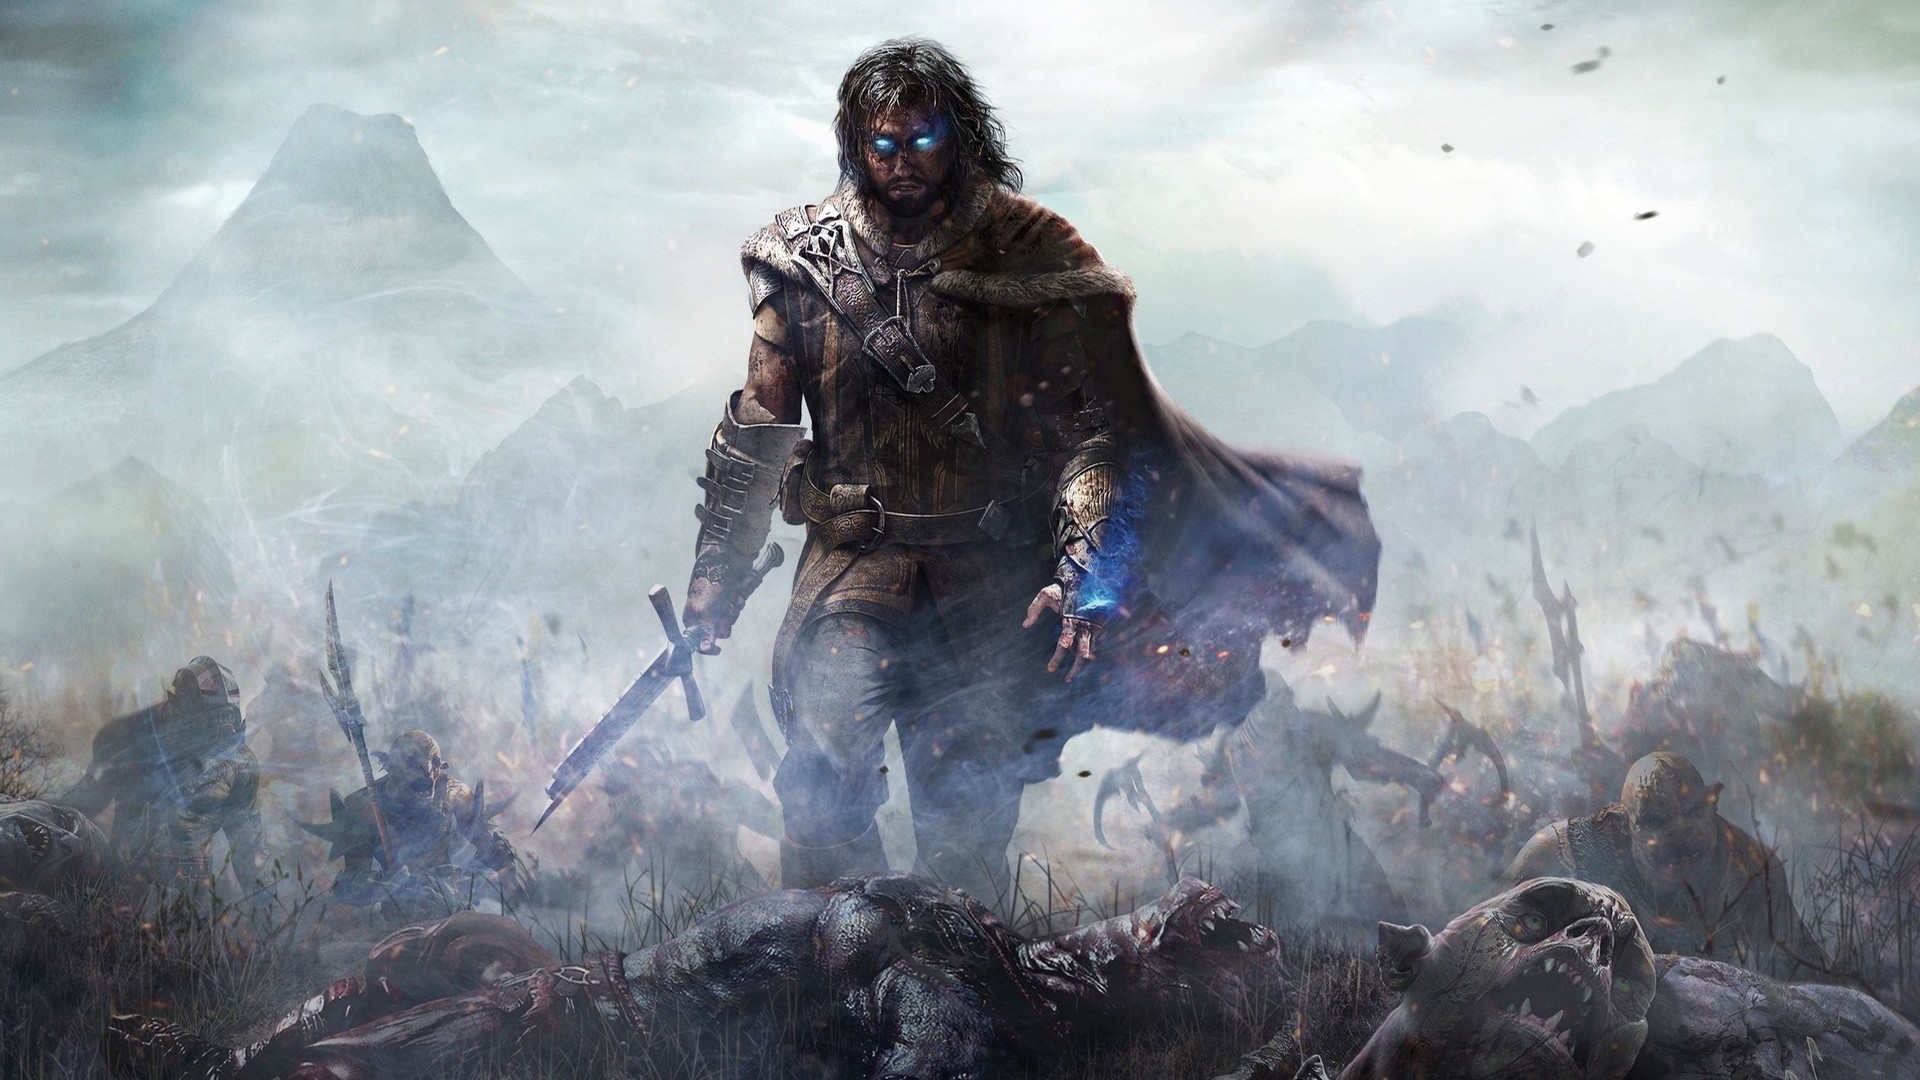 Prime Gaming September includes Shadow of Mordor and Assassin's Creed